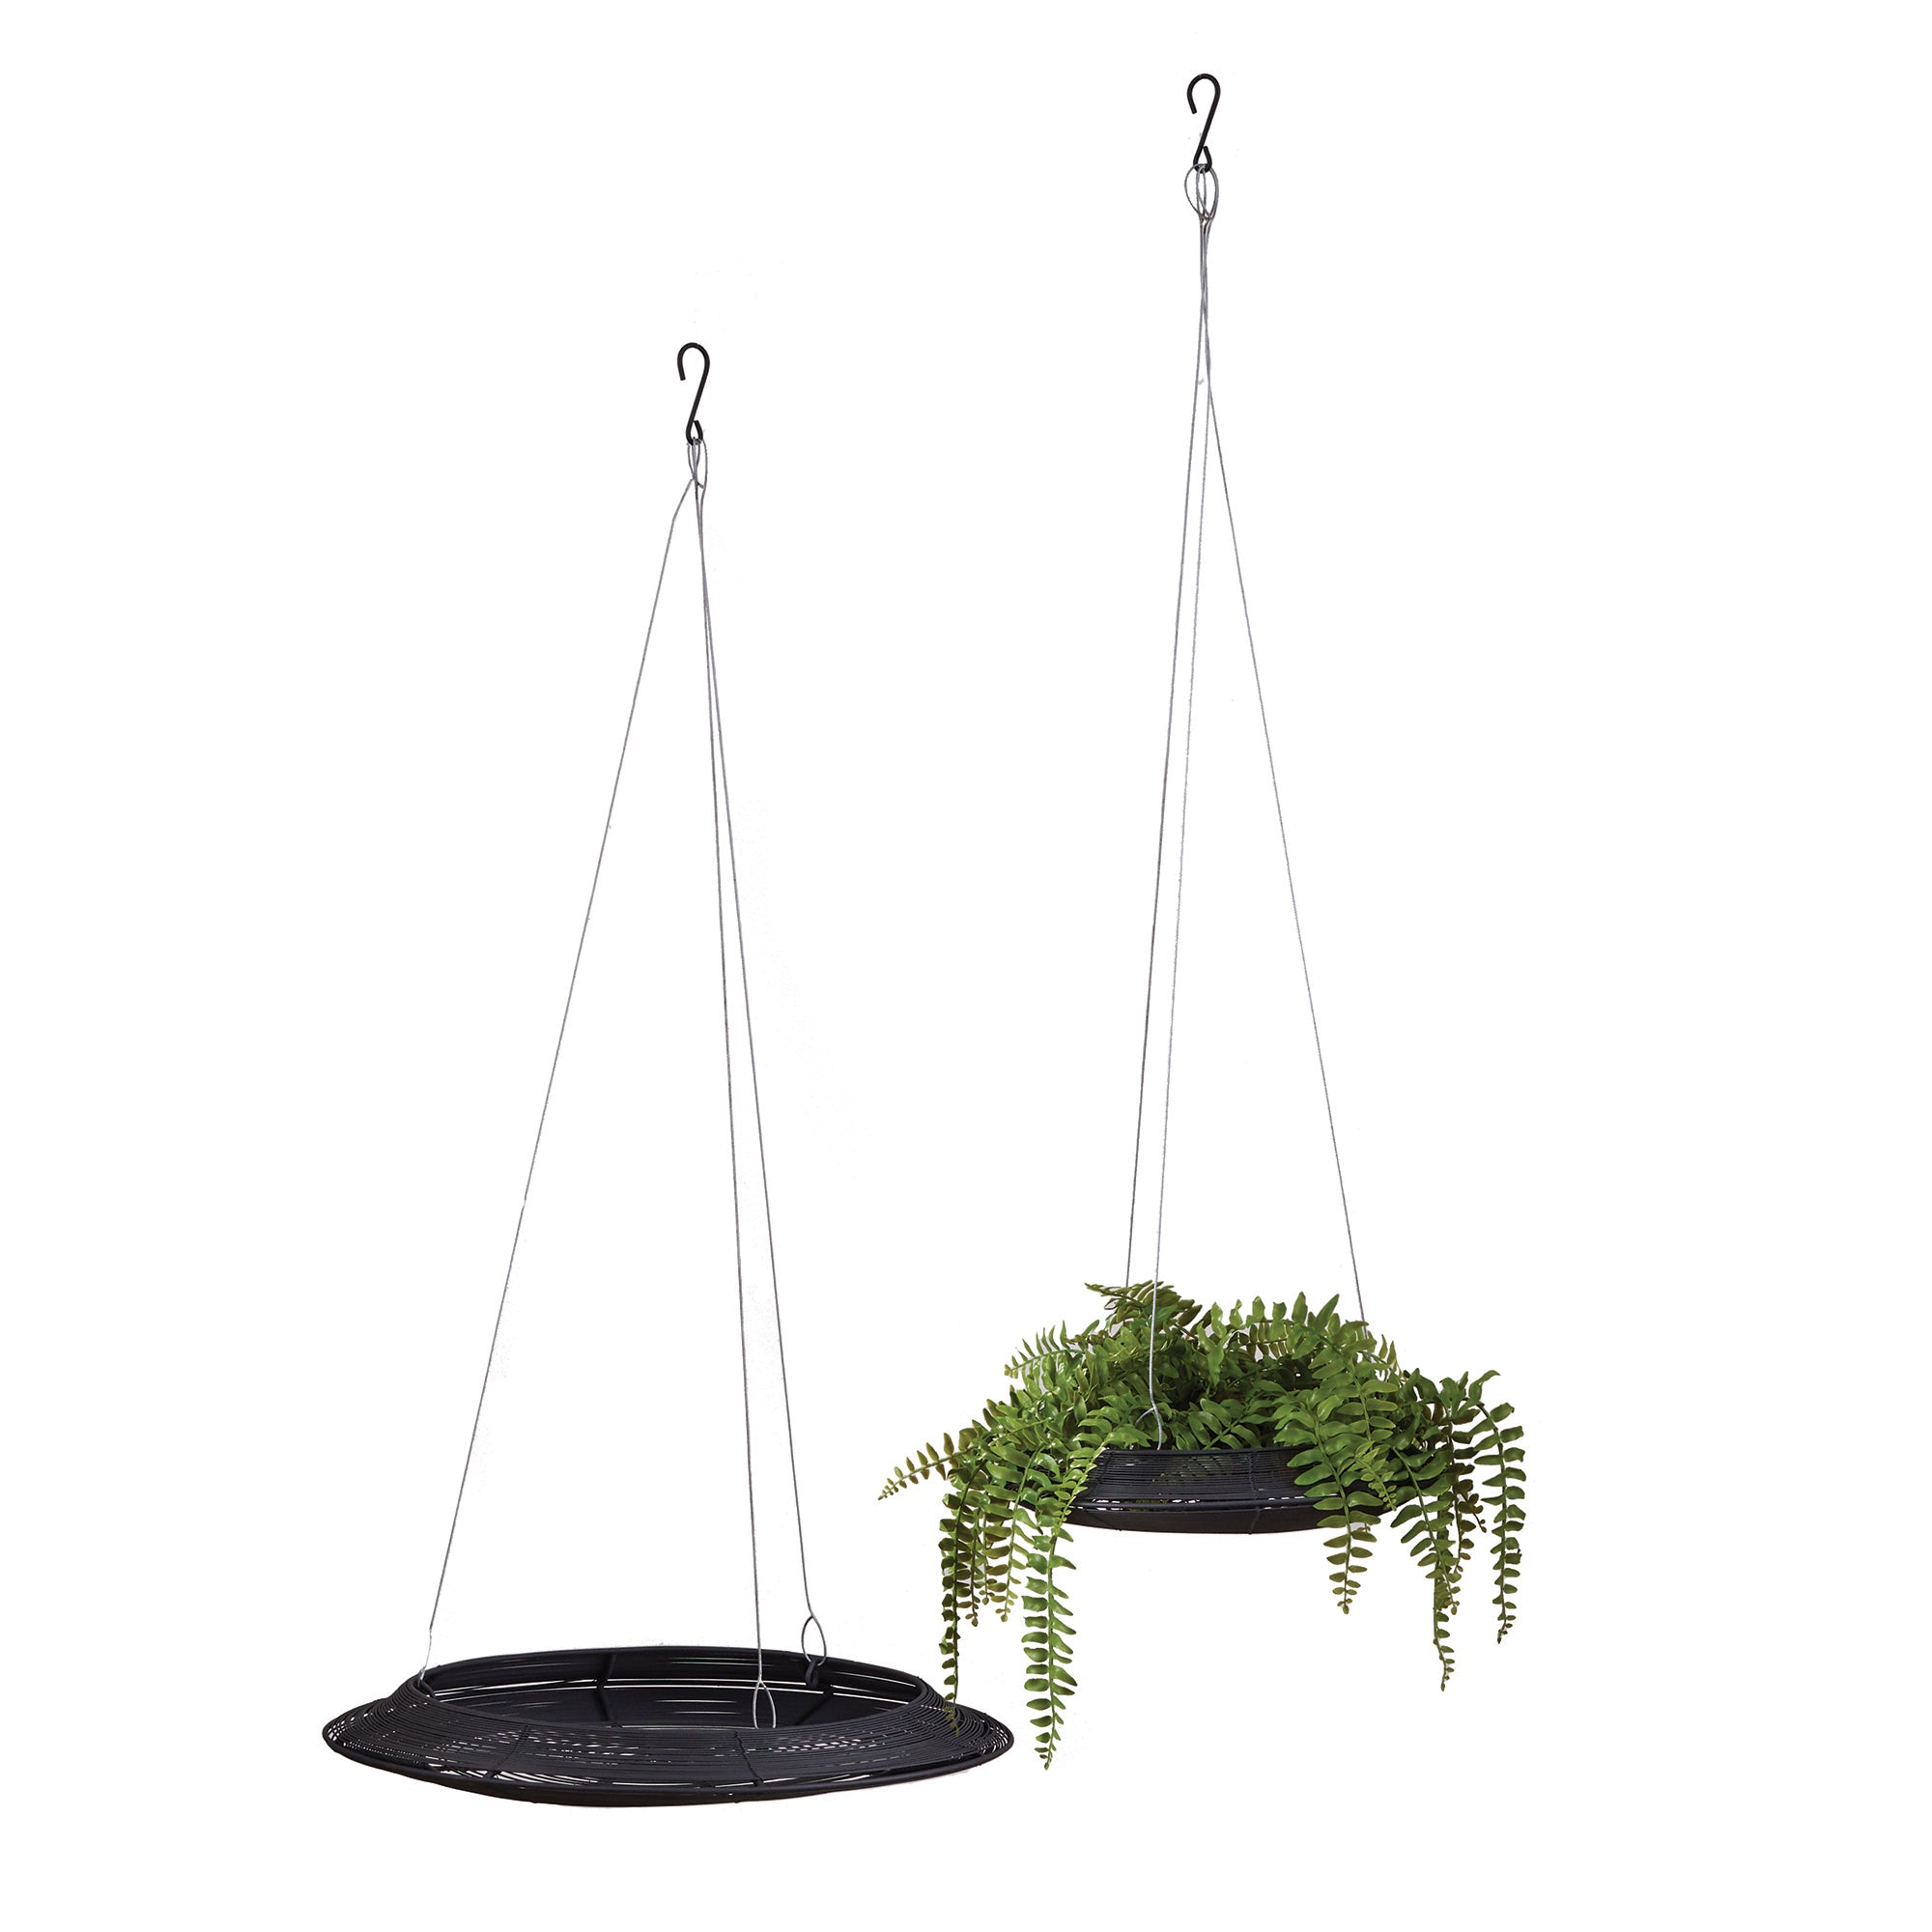 Basic in form with an unexpected shallow shape, this set of hanging wire baskets is made for the modern home Fill with a cascading succulent or some light air plants and hang on porch, balcony or anywhere. Amethyst Home provides interior design, new construction, custom furniture, and area rugs in the Kansas City metro area.